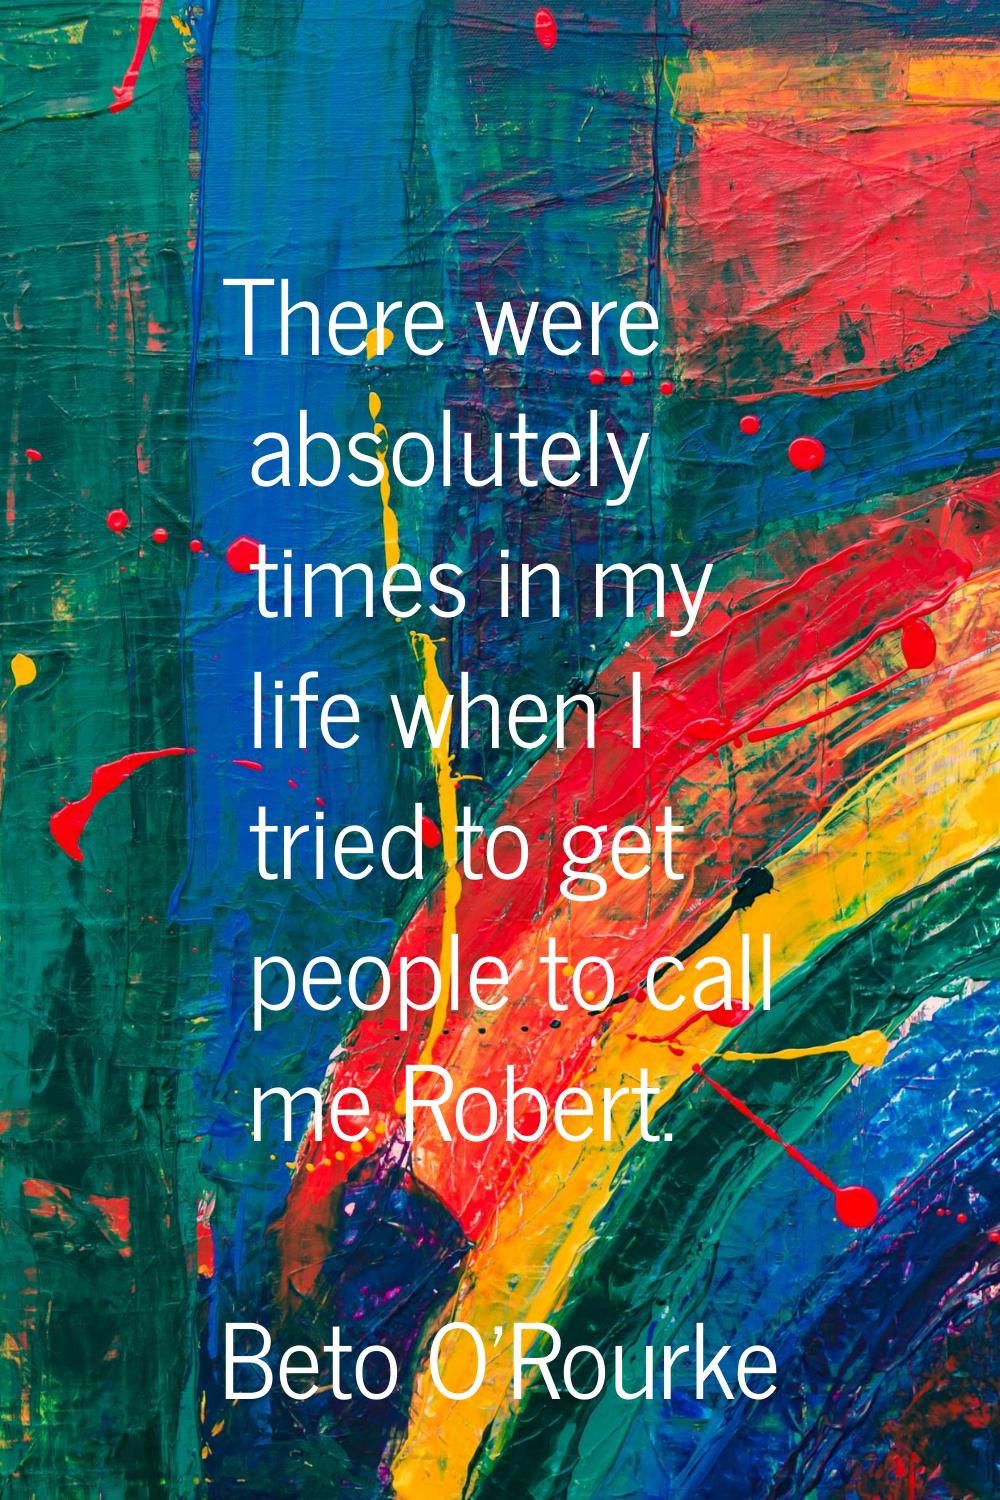 There were absolutely times in my life when I tried to get people to call me Robert.